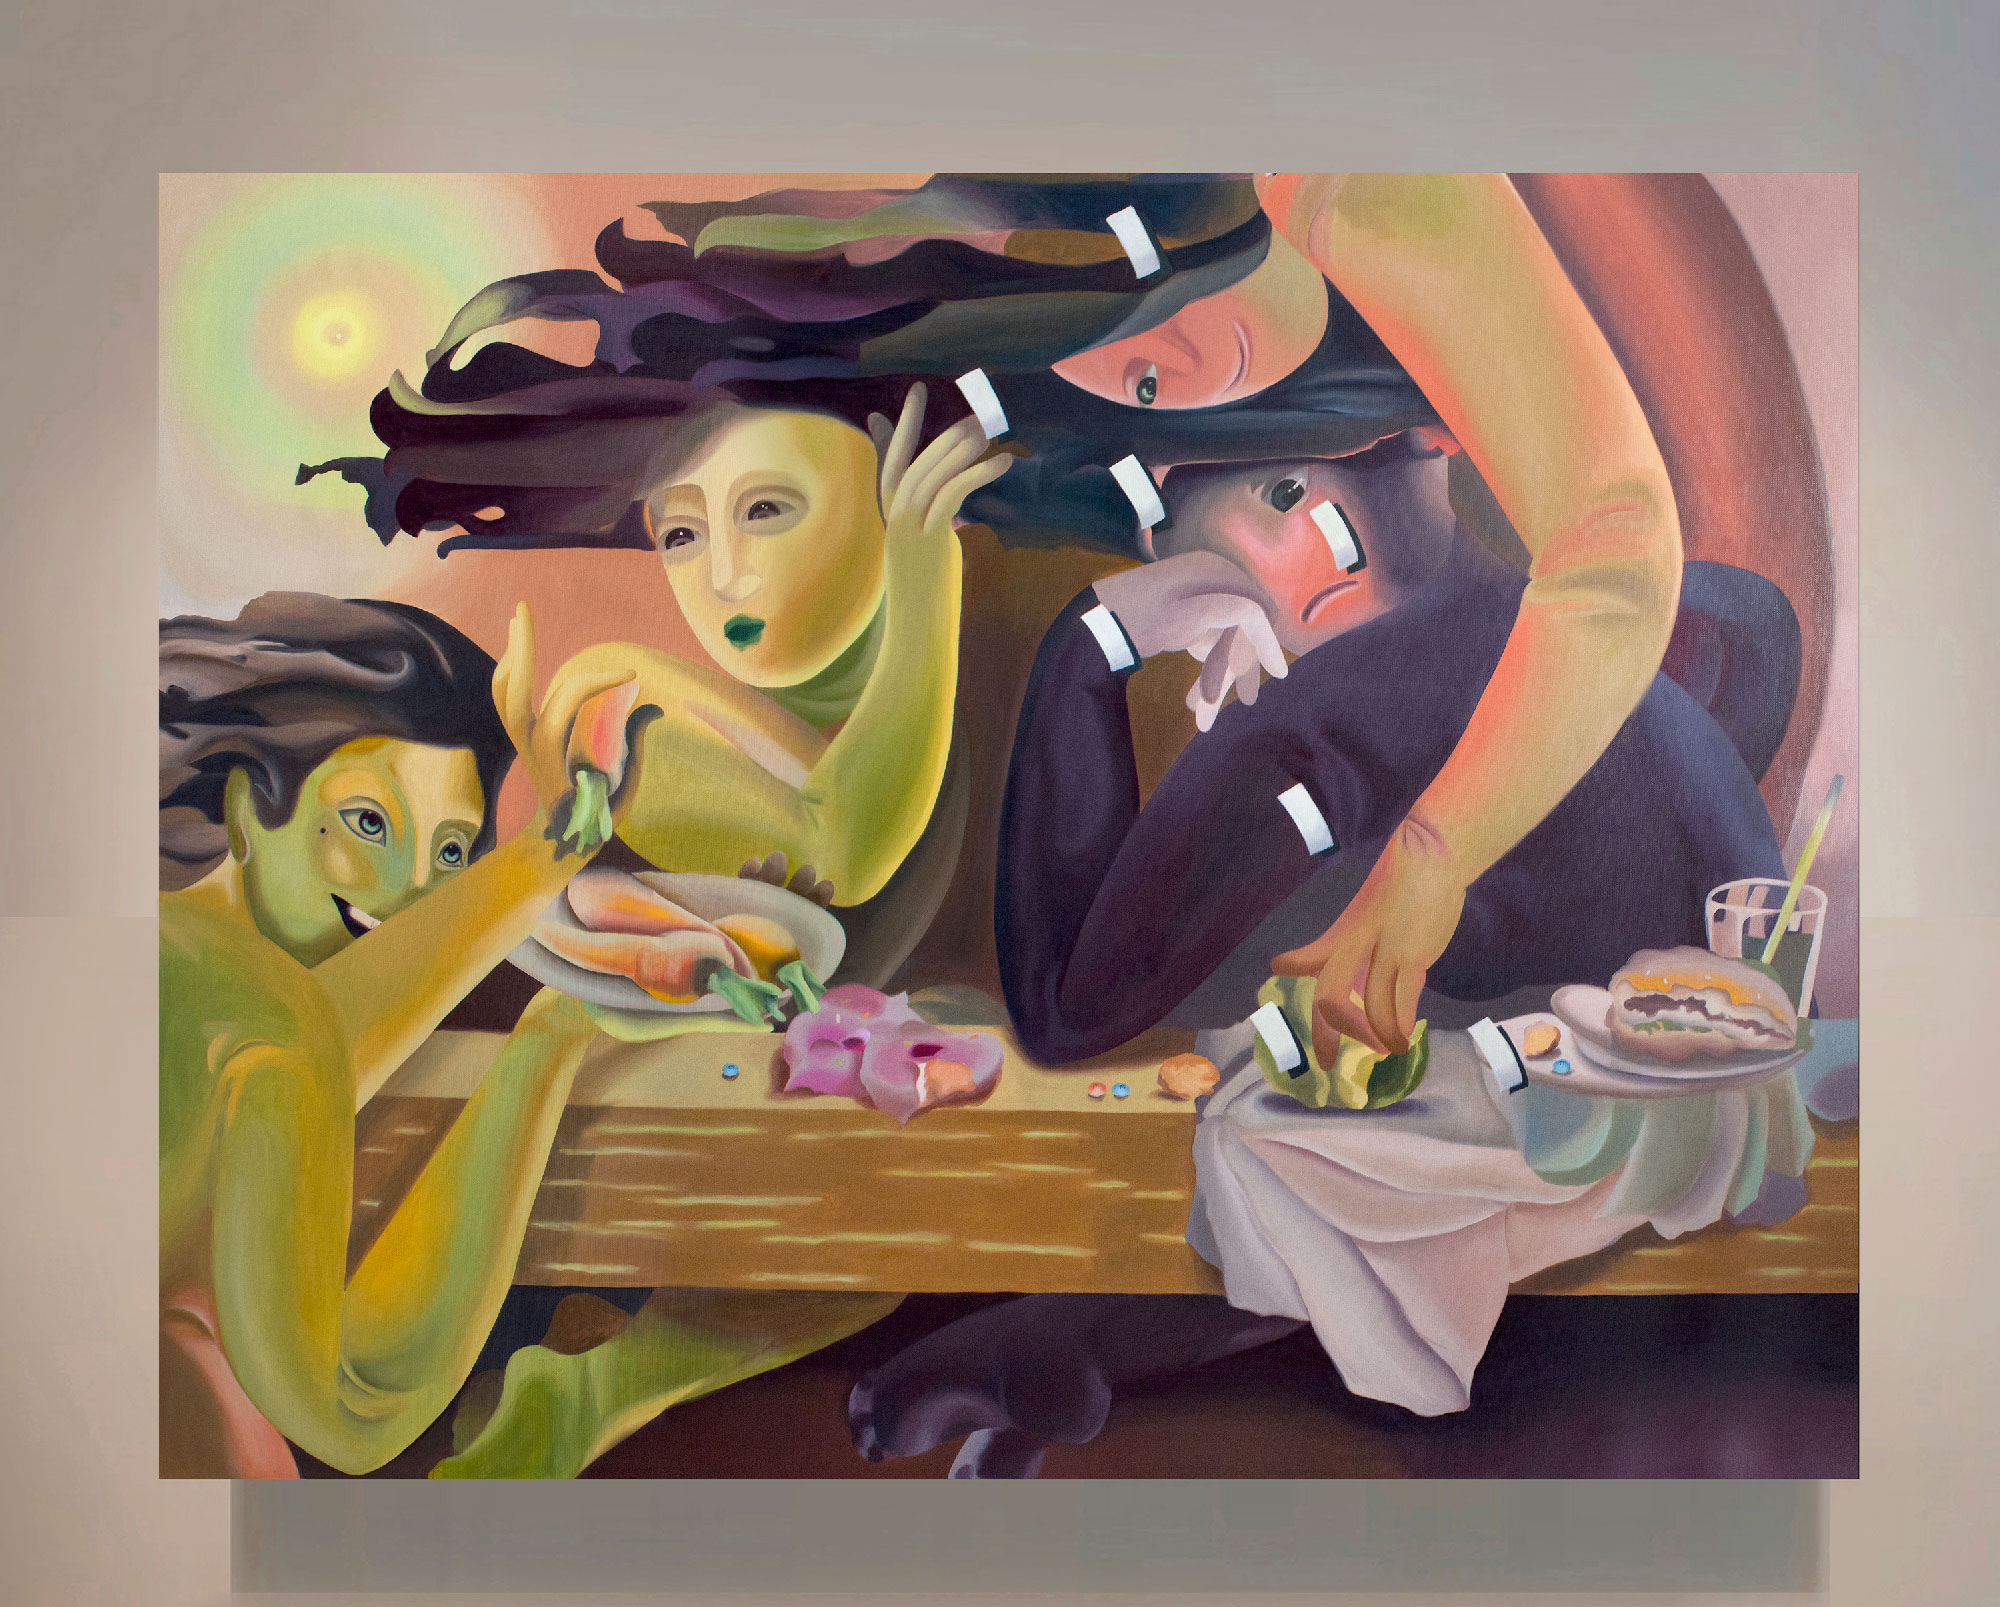 FOODISM ART OIL PAINTING ON CANVAS MS DUY